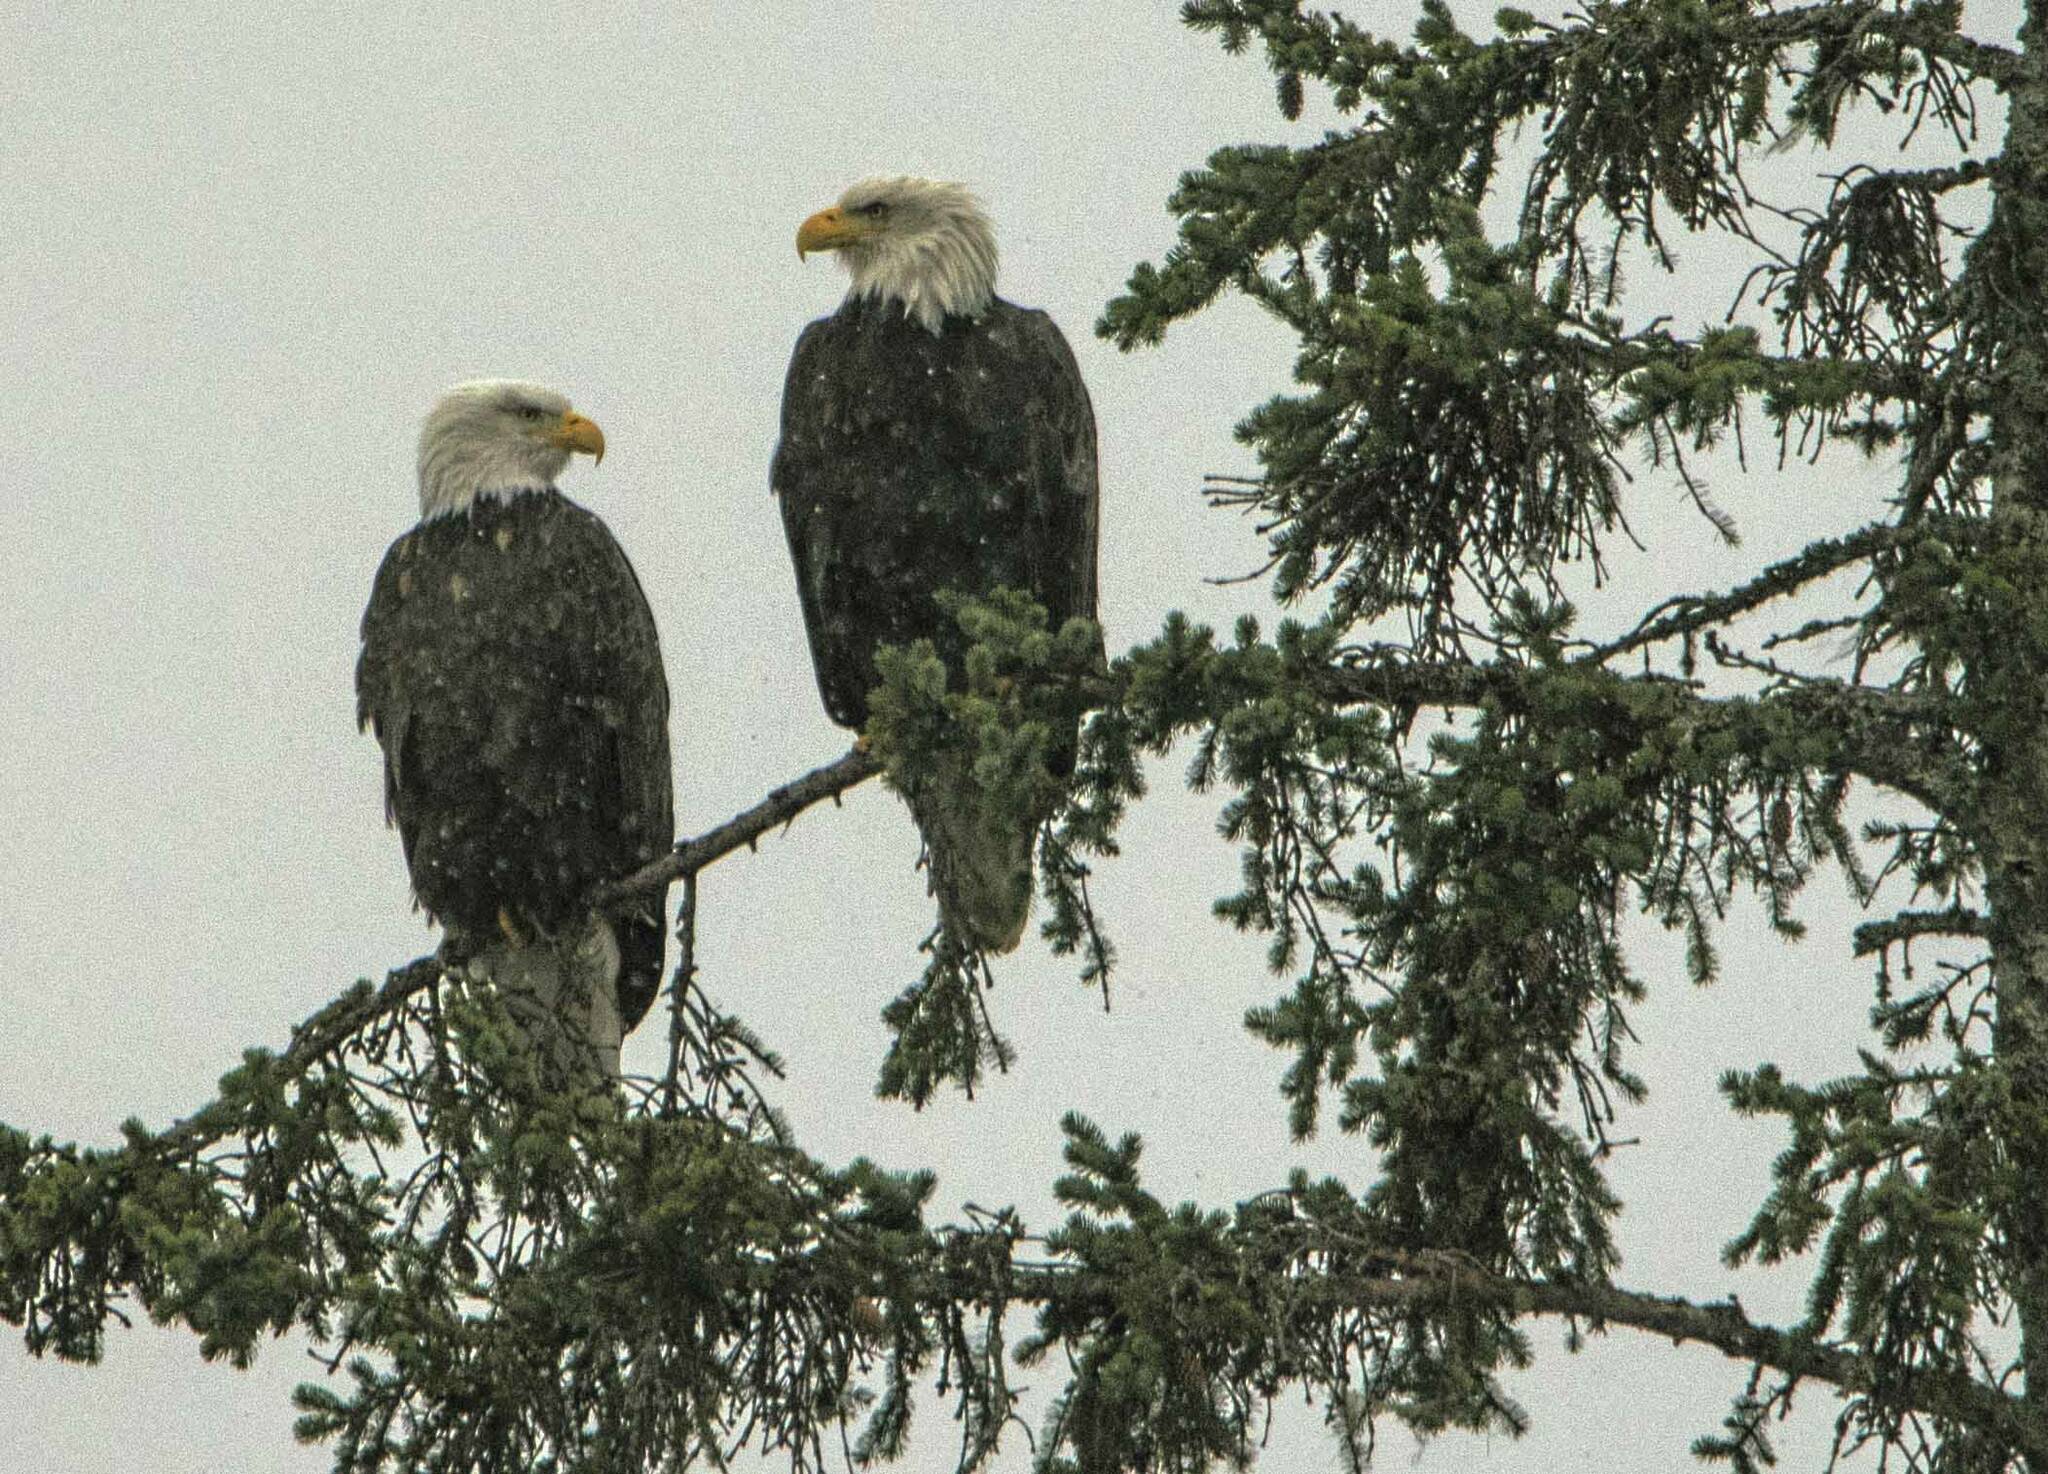 Two bald eagles reflect on winter Out the Road on Saturday, Nov. 27. (Courtesy Photo / Kenneth Gill, gillfoto)